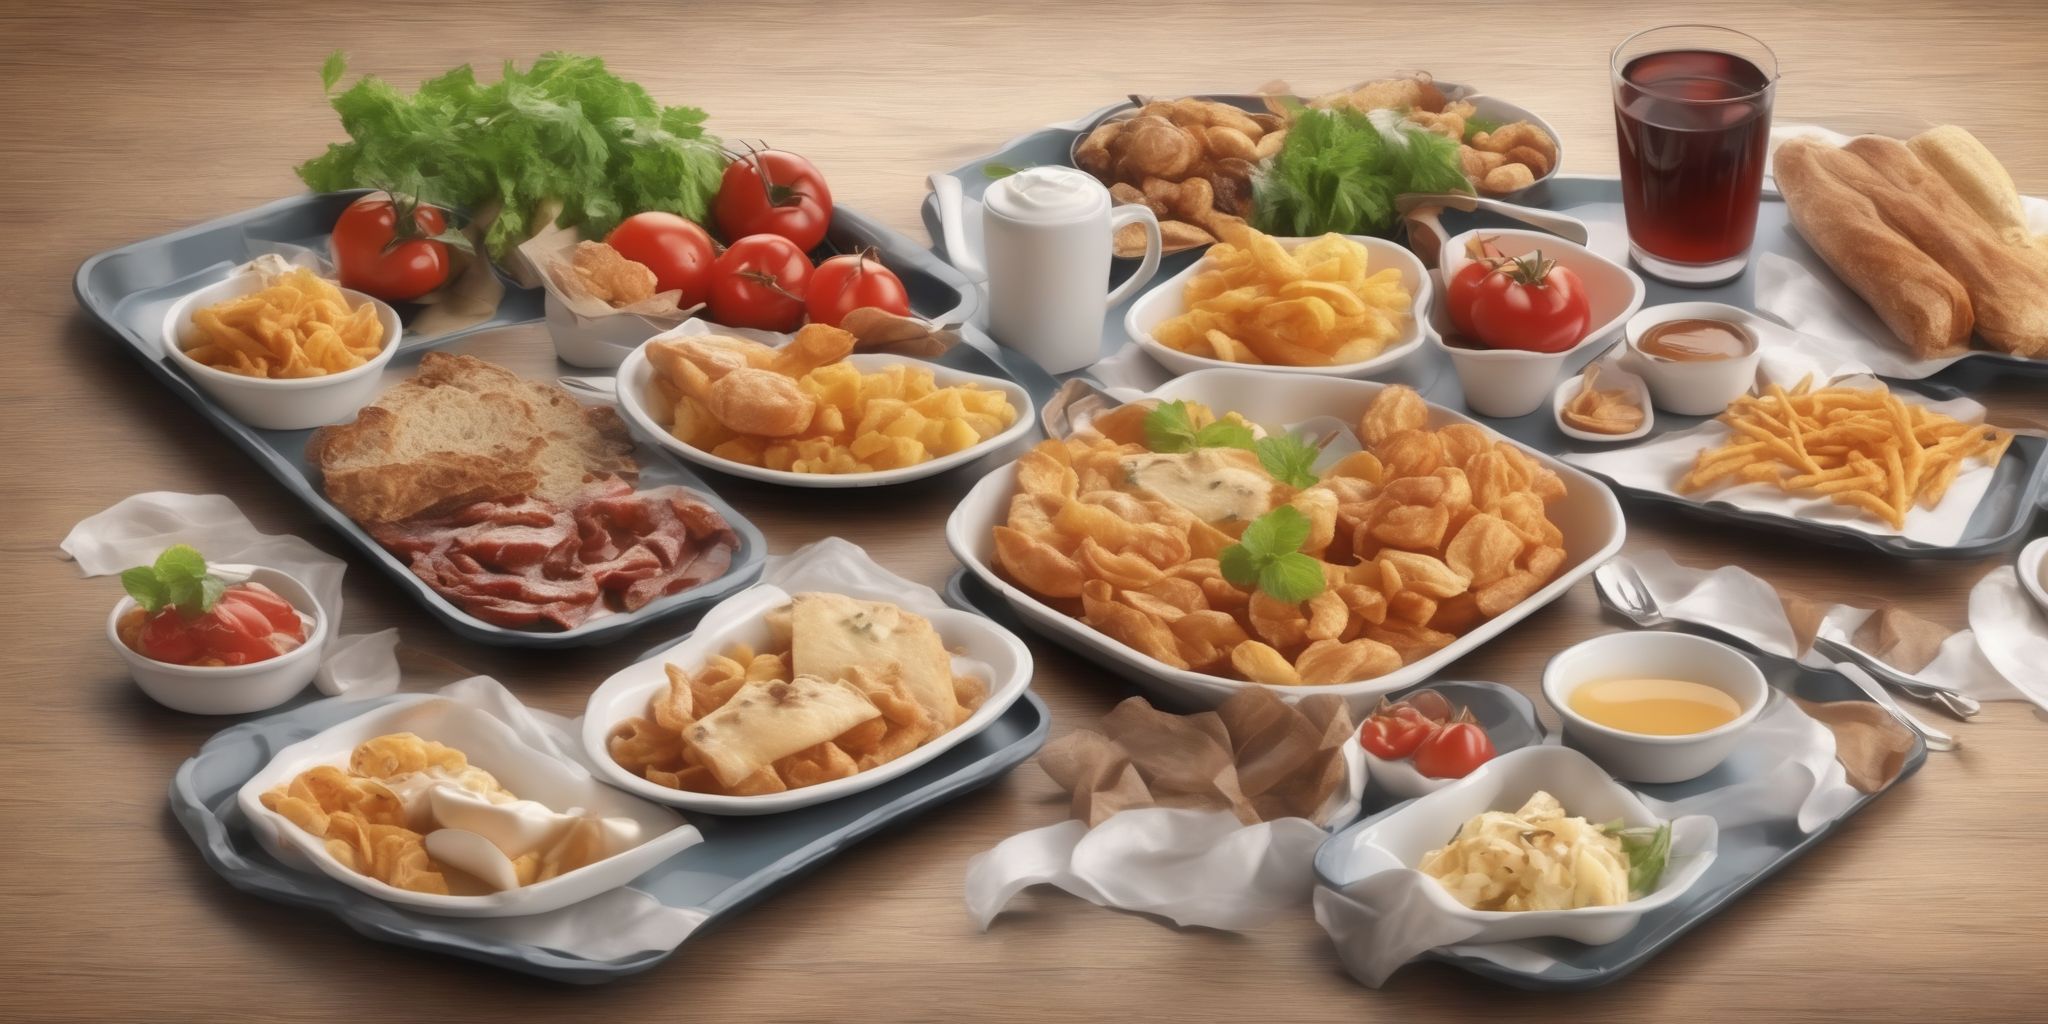 Food tray  in realistic, photographic style